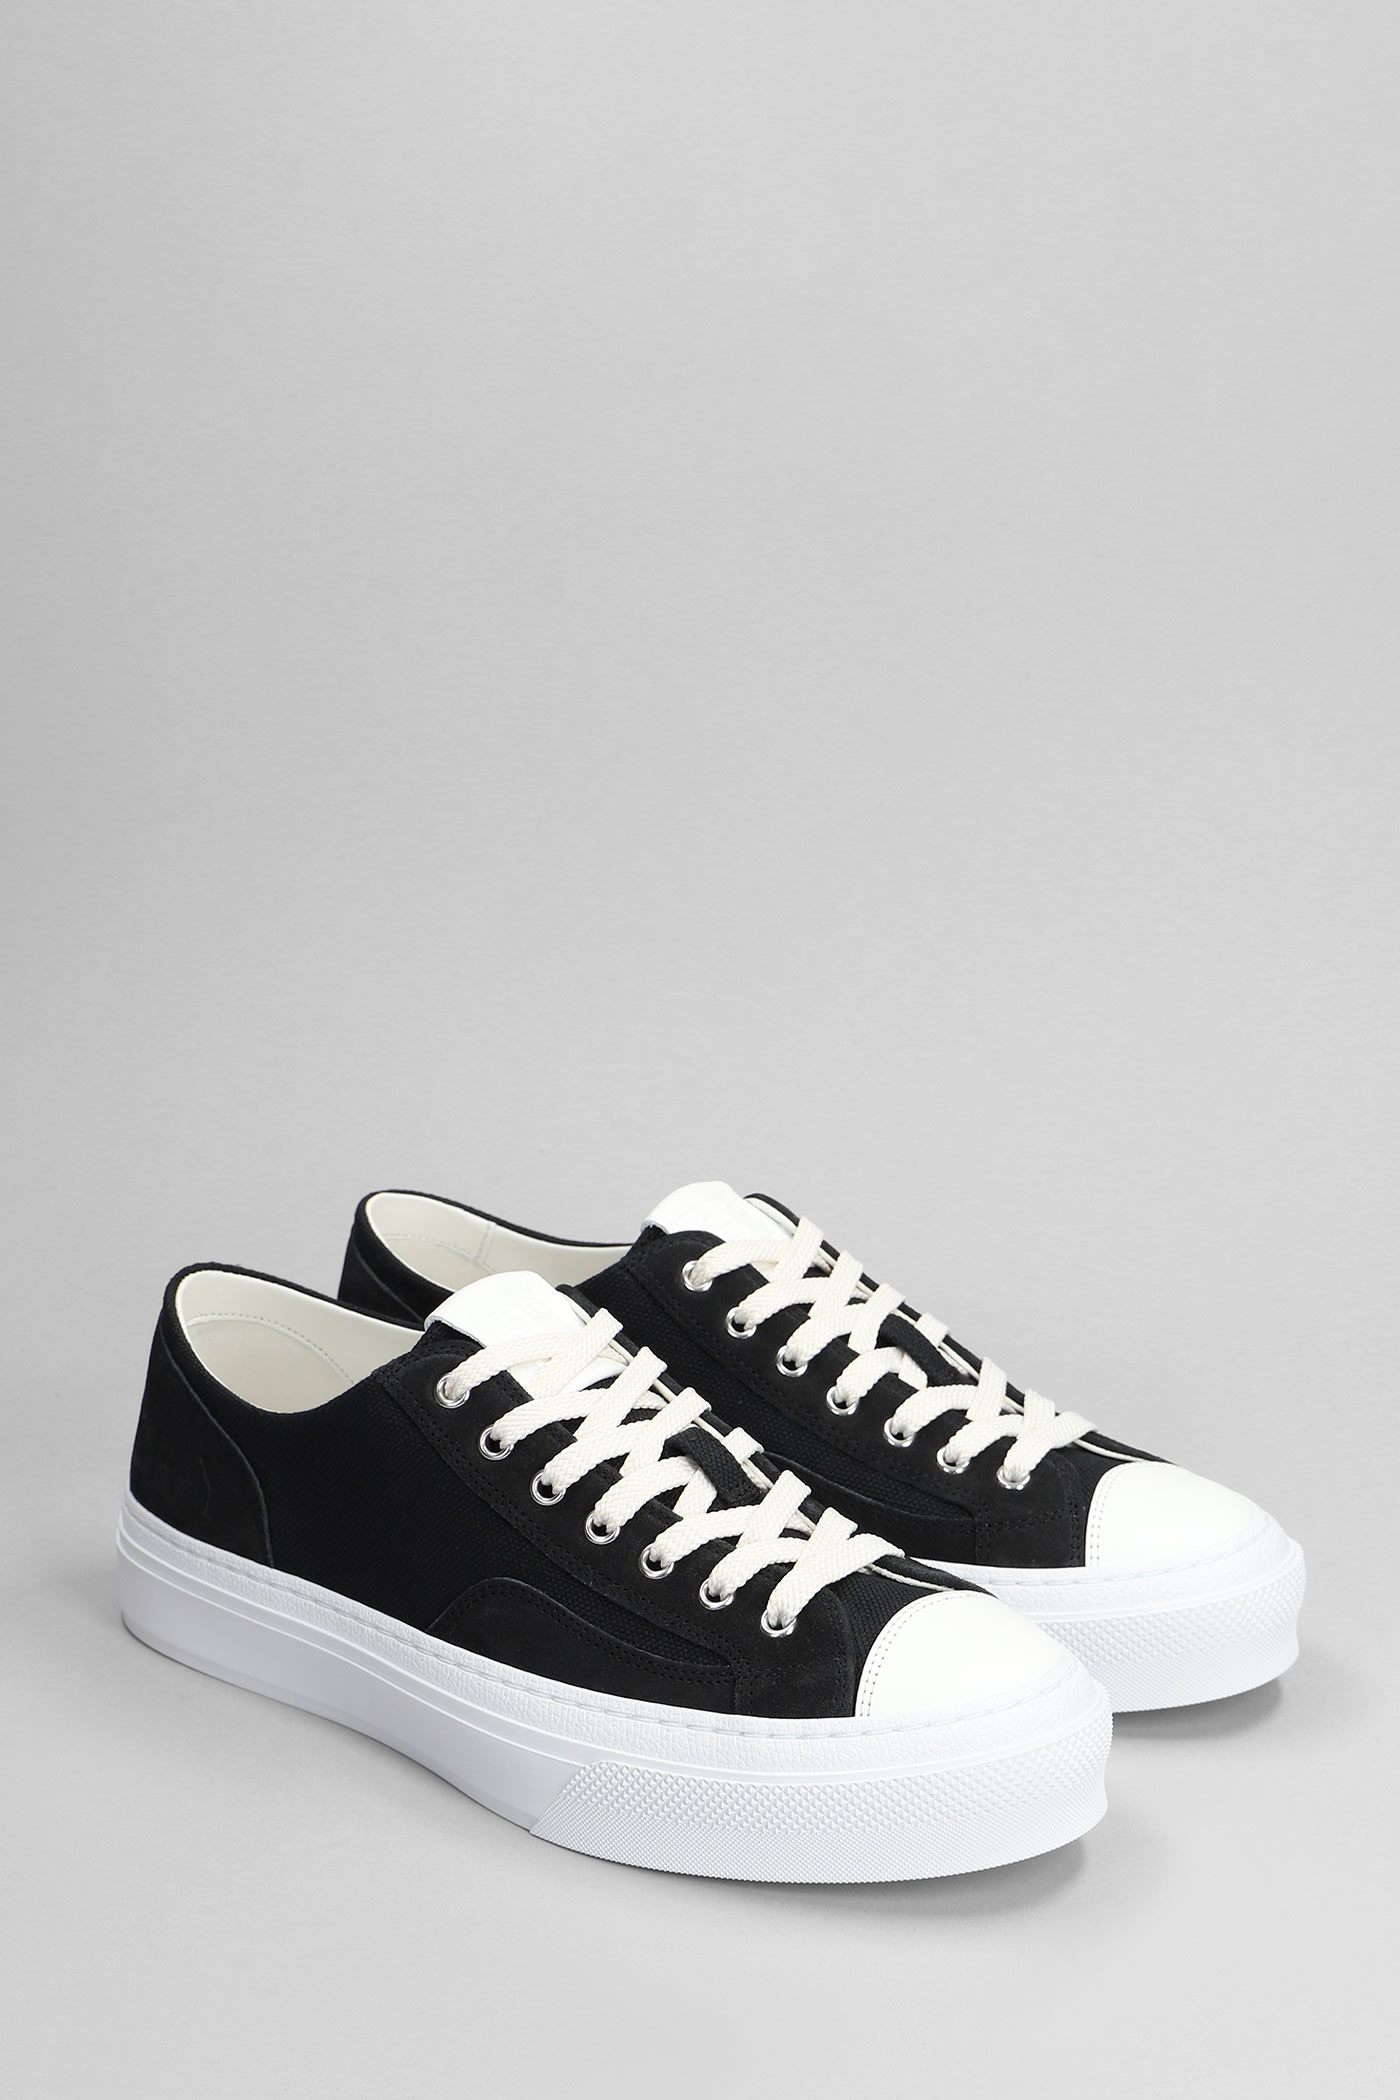 Shop Givenchy City Low Sneakers In Black Suede And Fabric